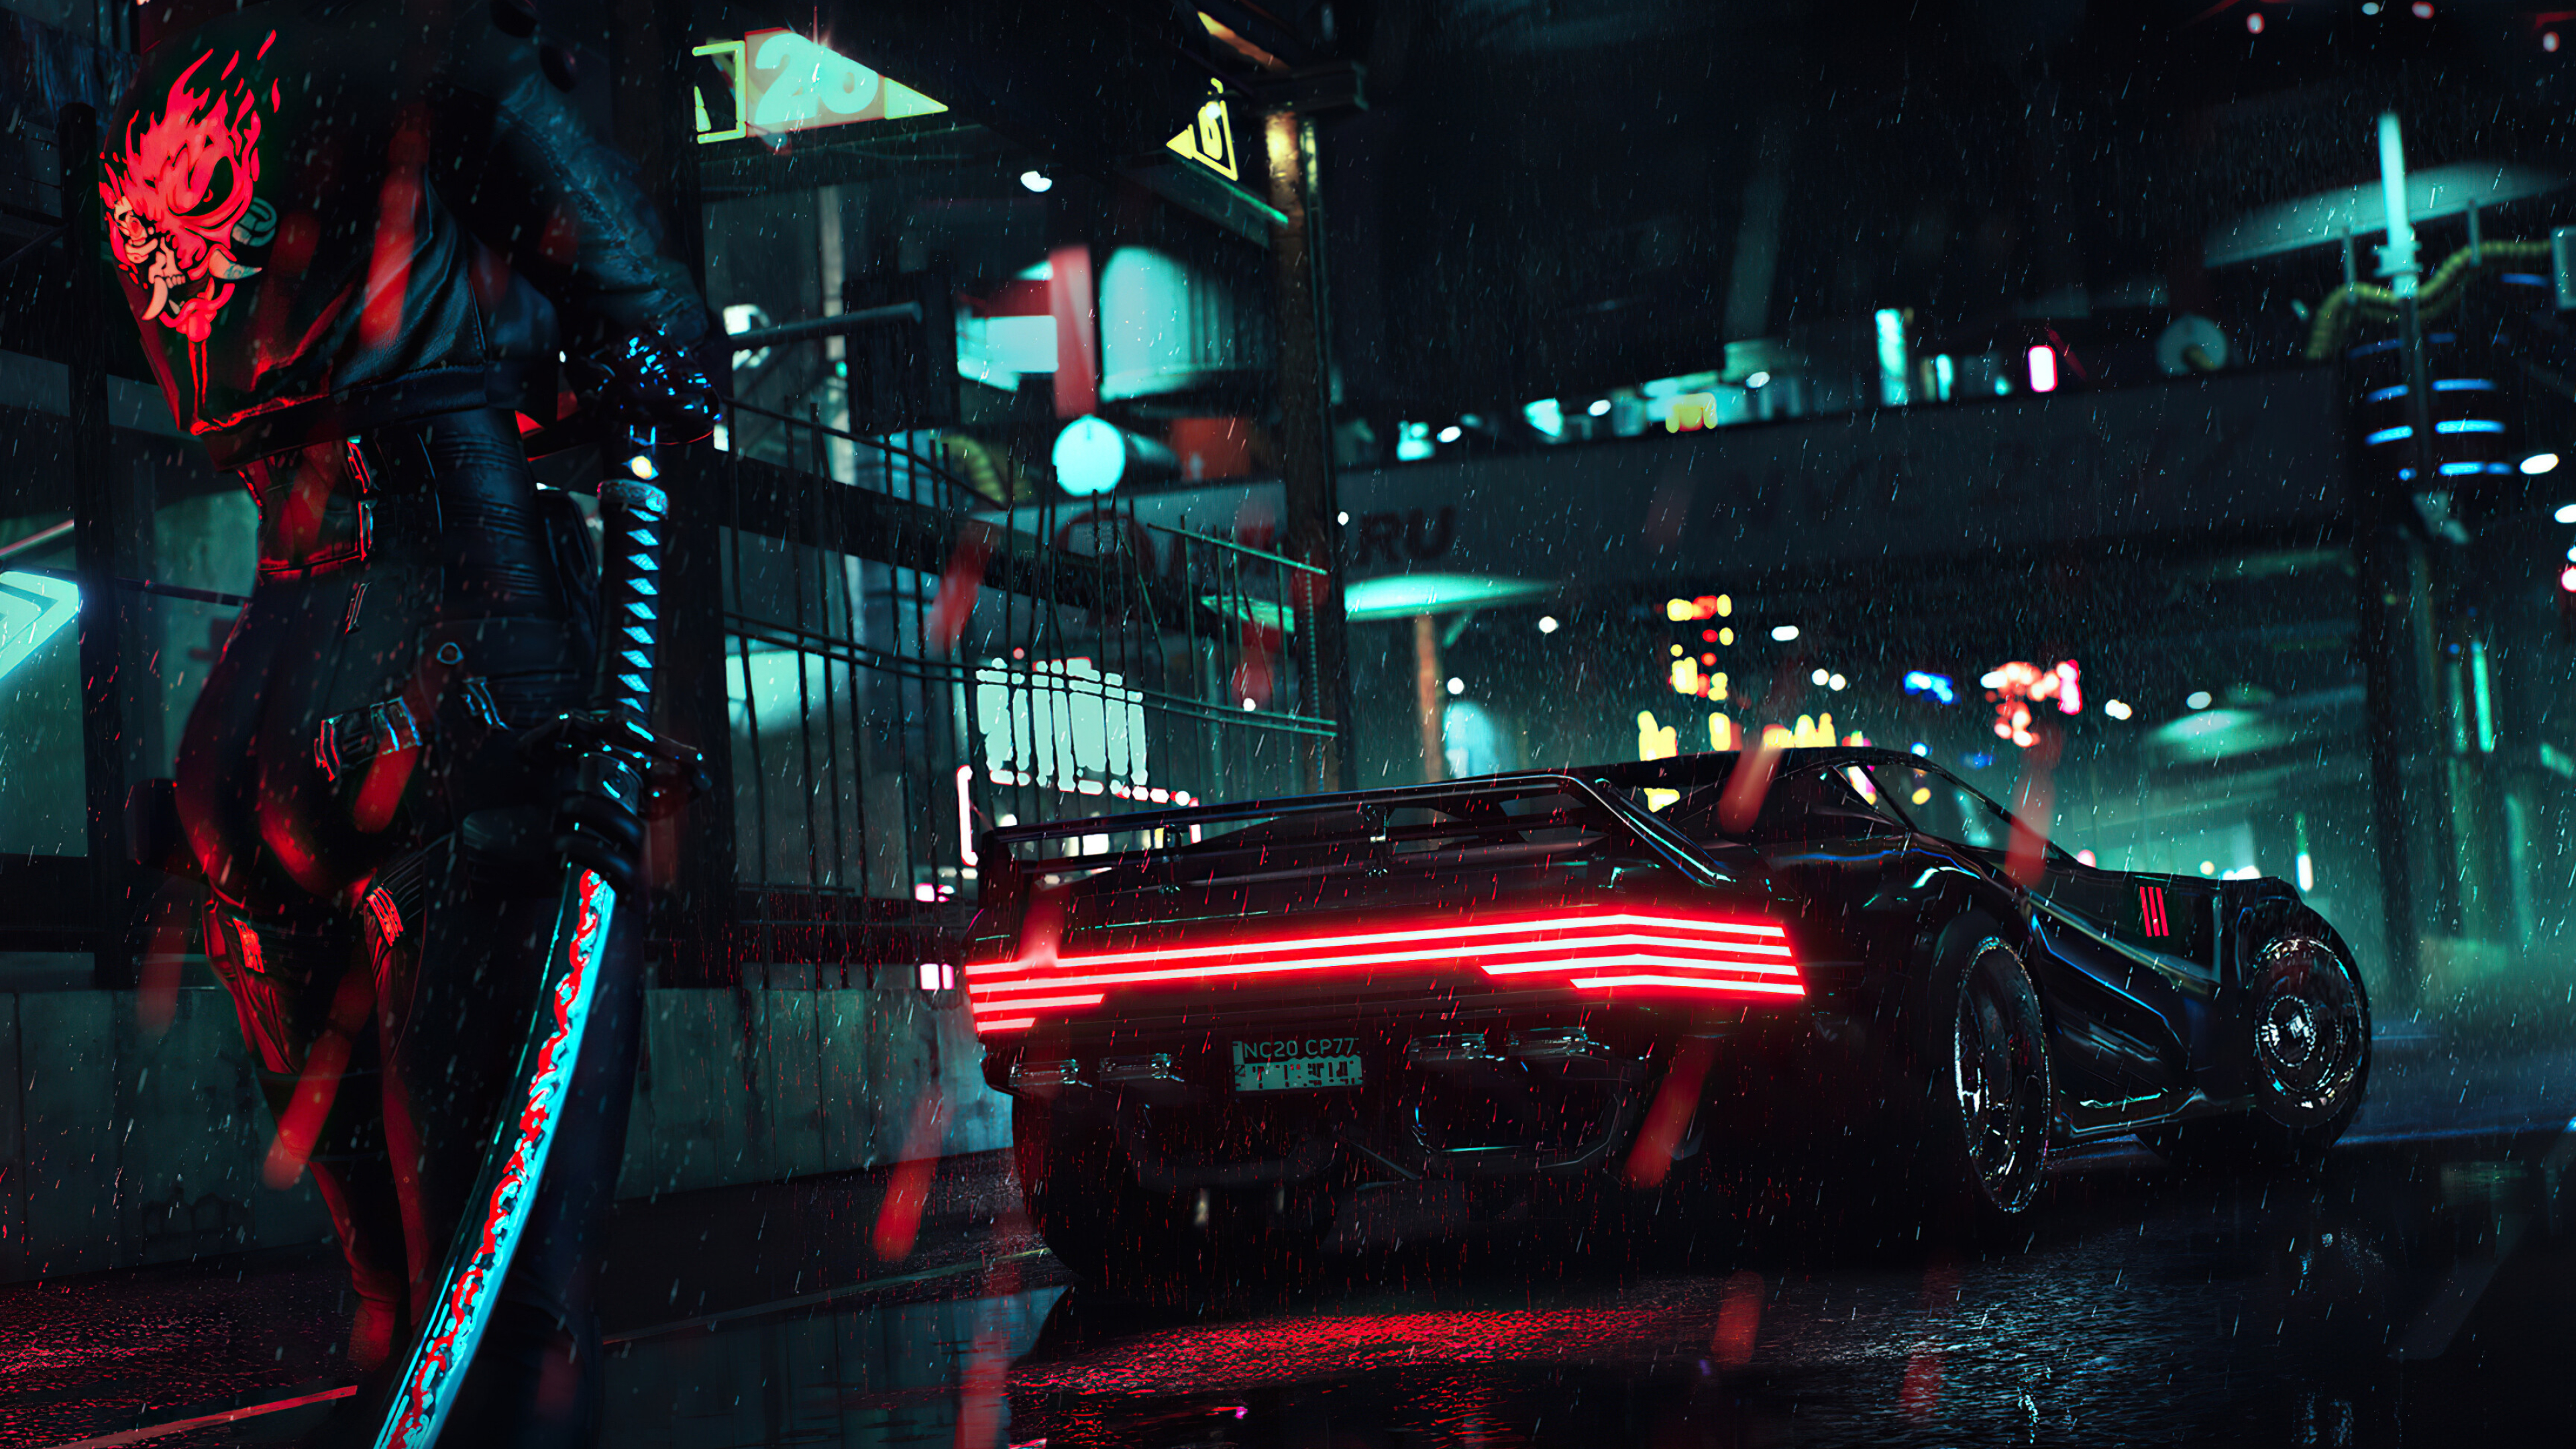 Cyberpunk 2077: The open world metropolis of Night City consists of six regions; the corporate City Centre, immigrant-inhabited Watson, luxurious Westbrook, suburban Heywood, gang-infested Pacifica, and industrial Santo Domingo. 3840x2160 4K Background.